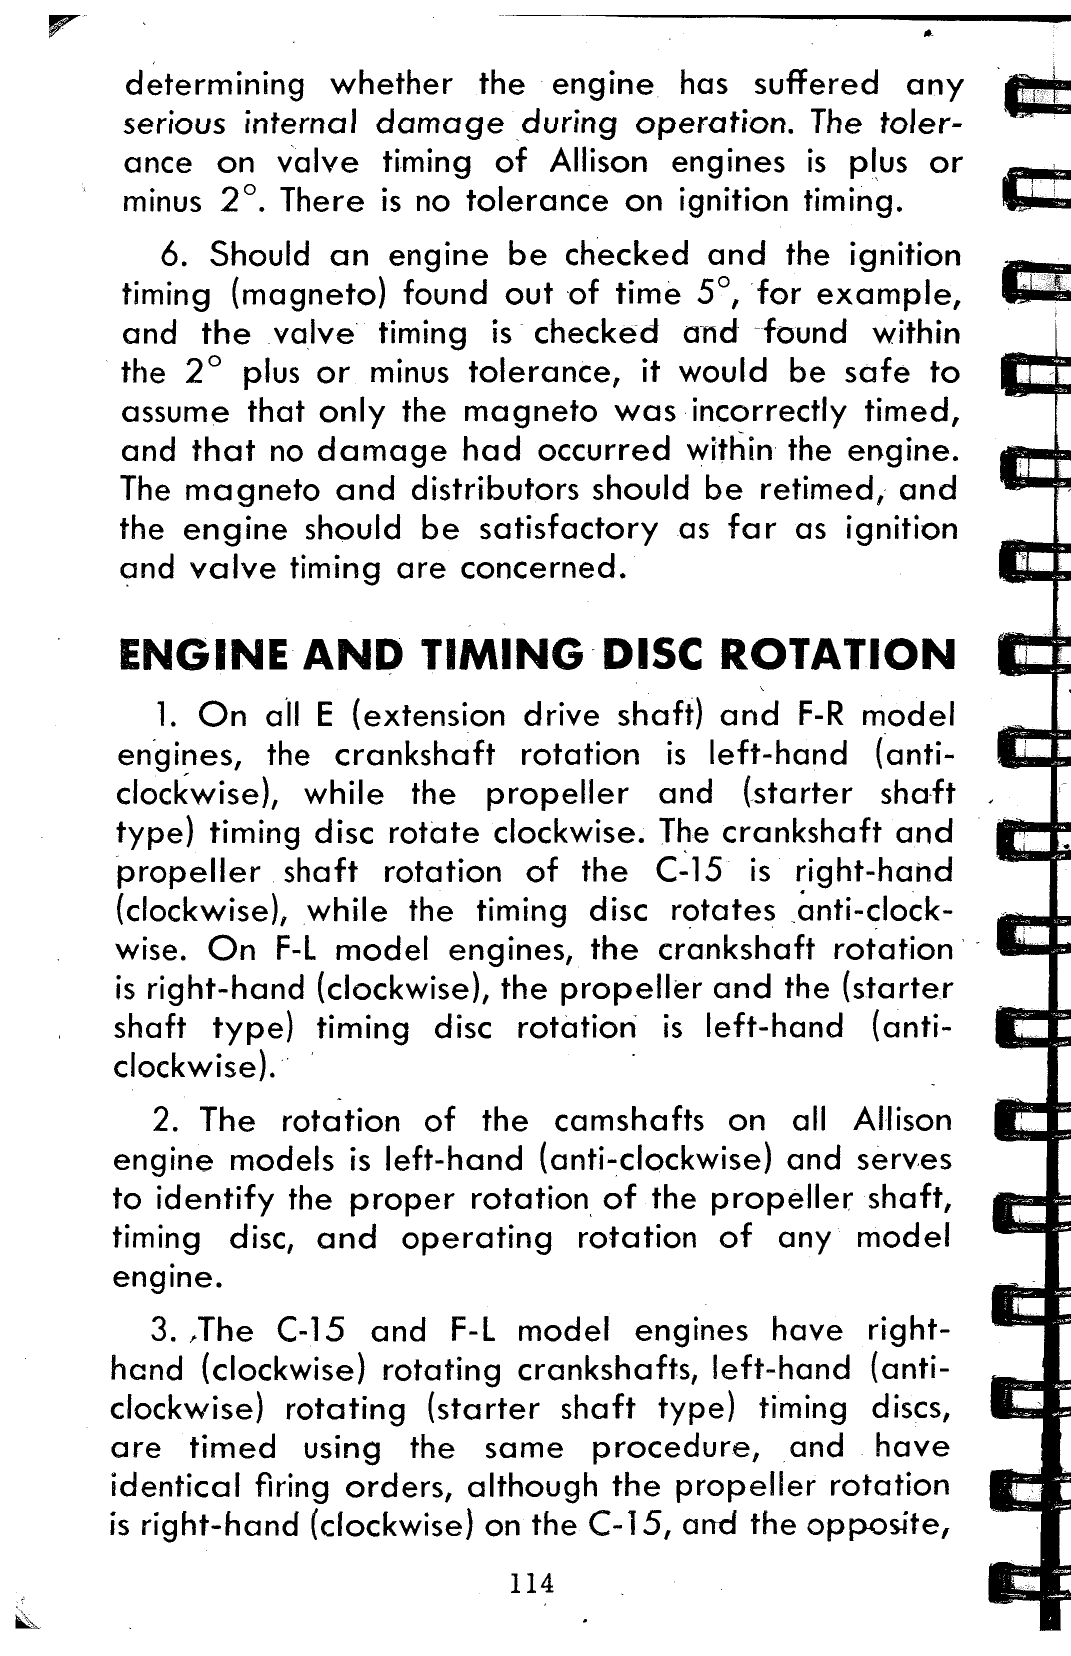 Sample page 119 from AirCorps Library document: Operators Manual - Allison V-1710 Engine Installation